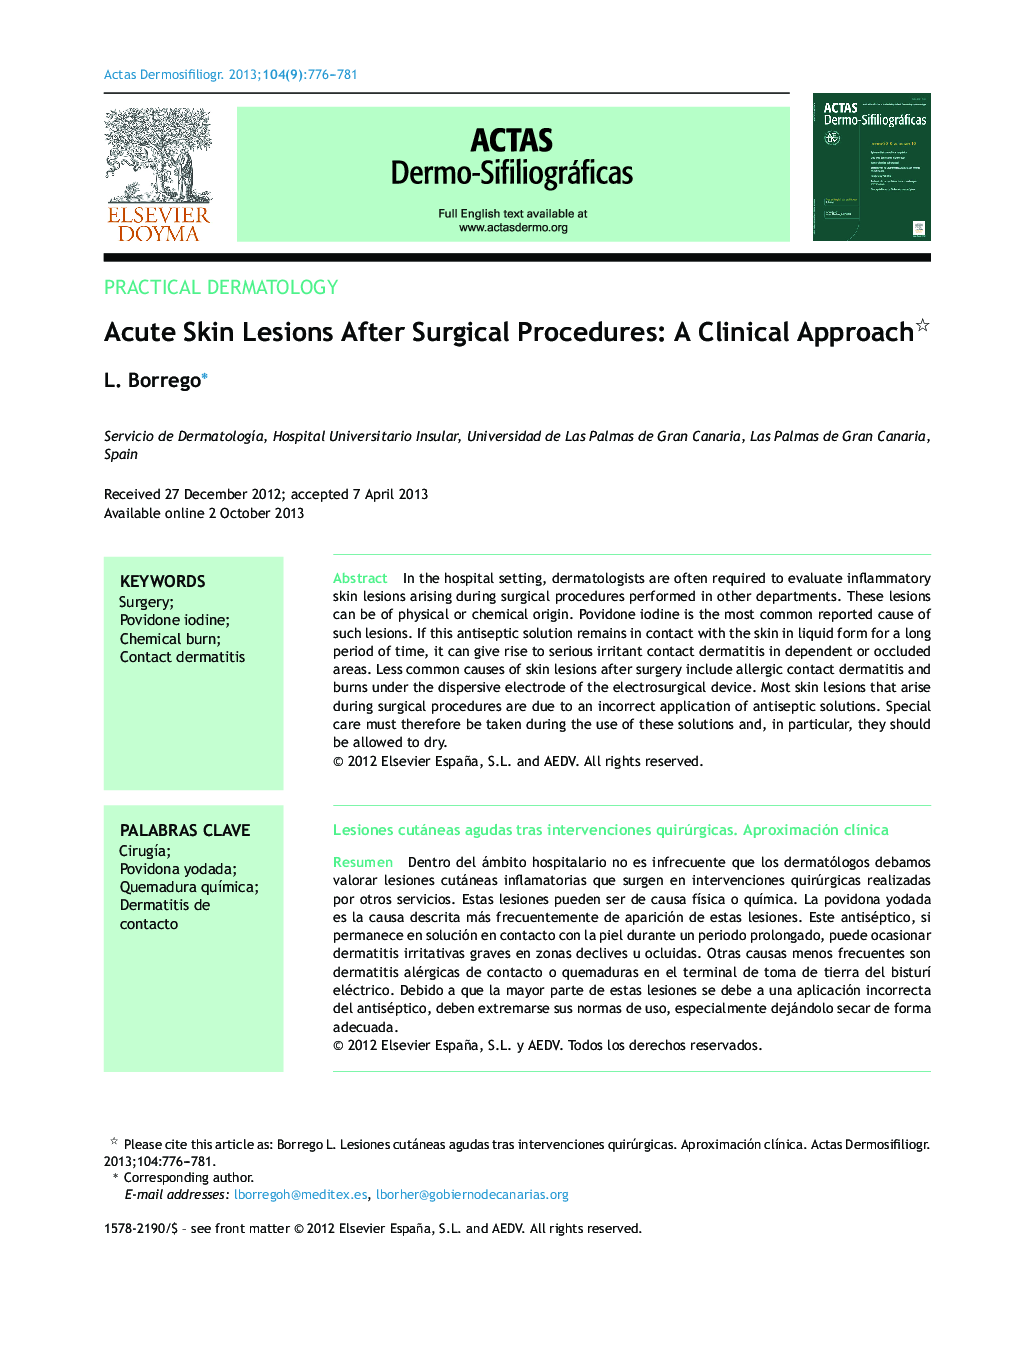 Acute Skin Lesions After Surgical Procedures: A Clinical Approach 